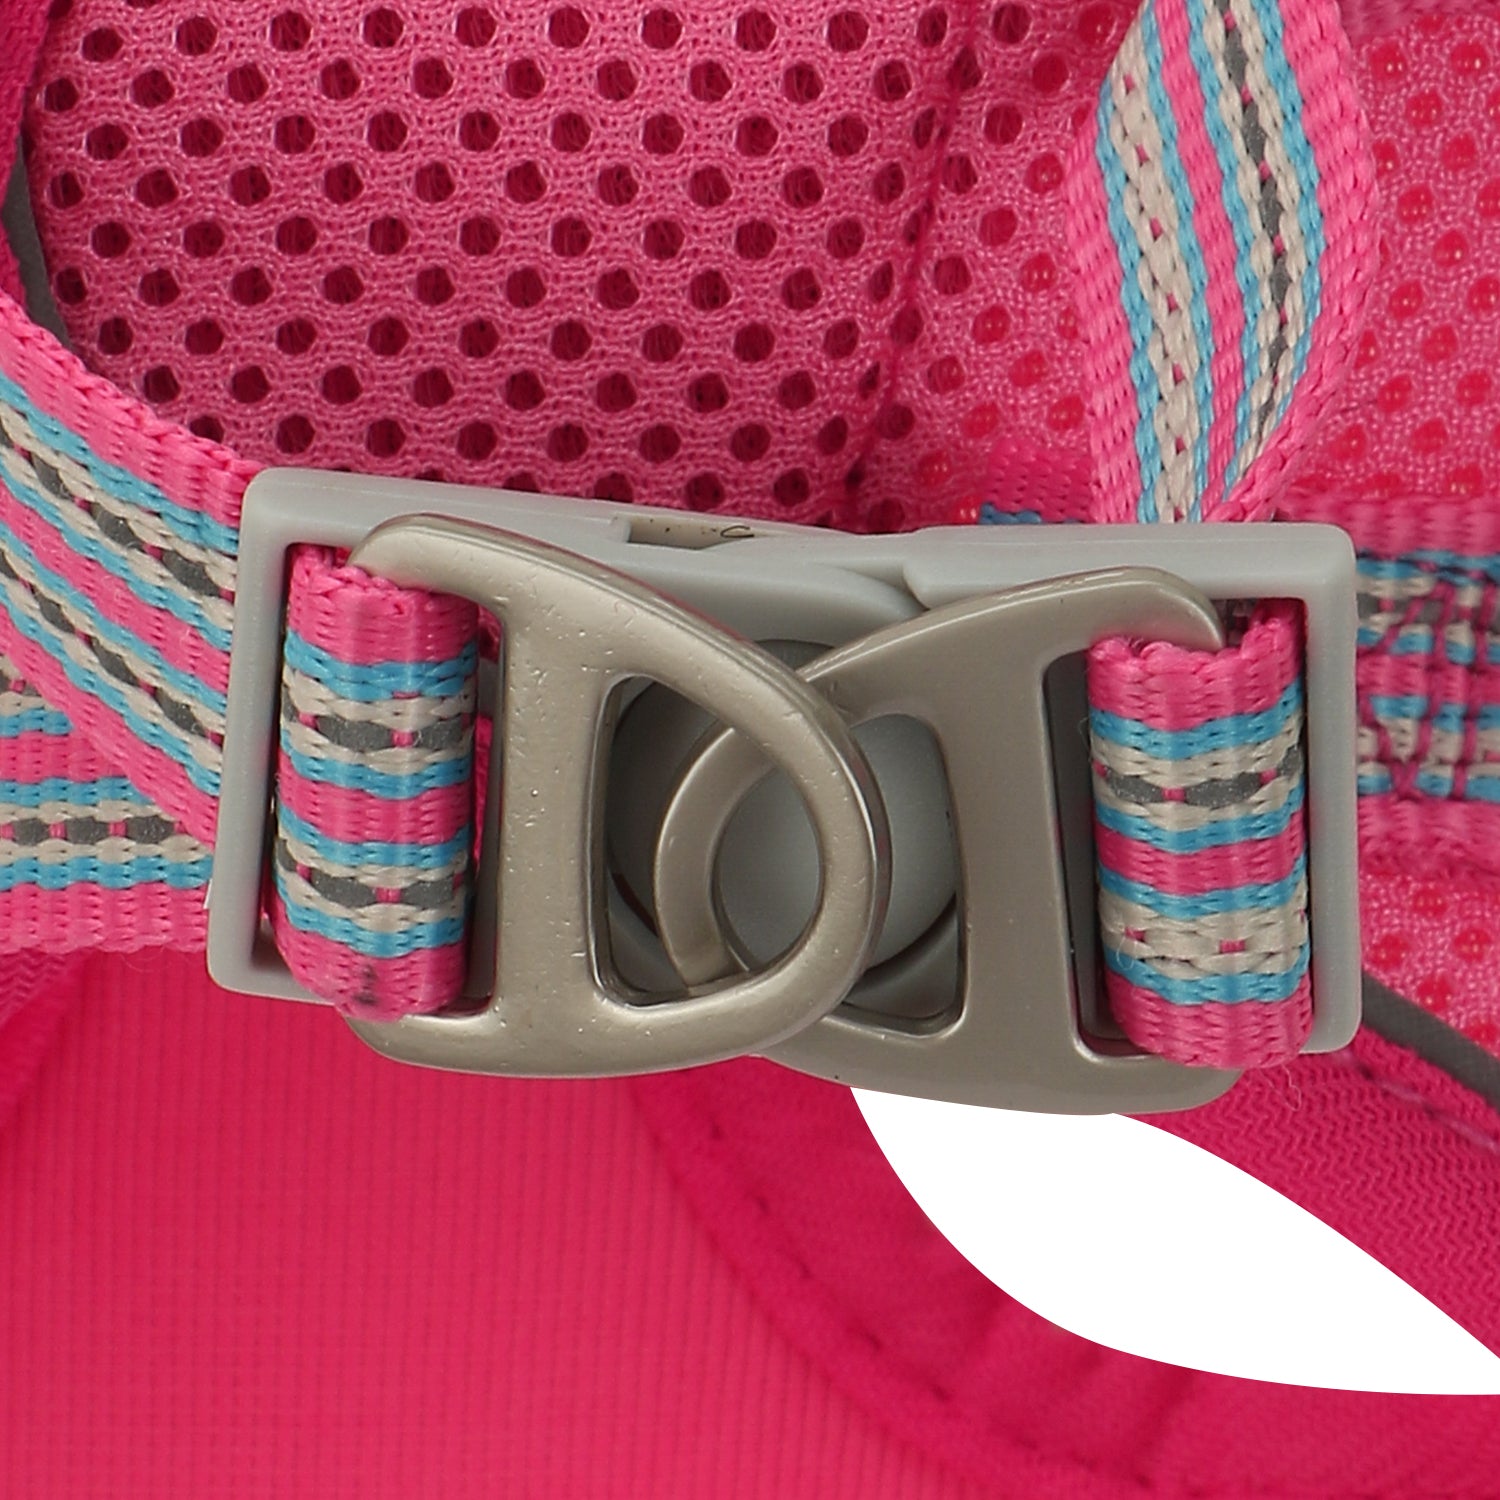 Basil - Adjustable Mesh Harness for Puppy, Dogs & Cats Pink